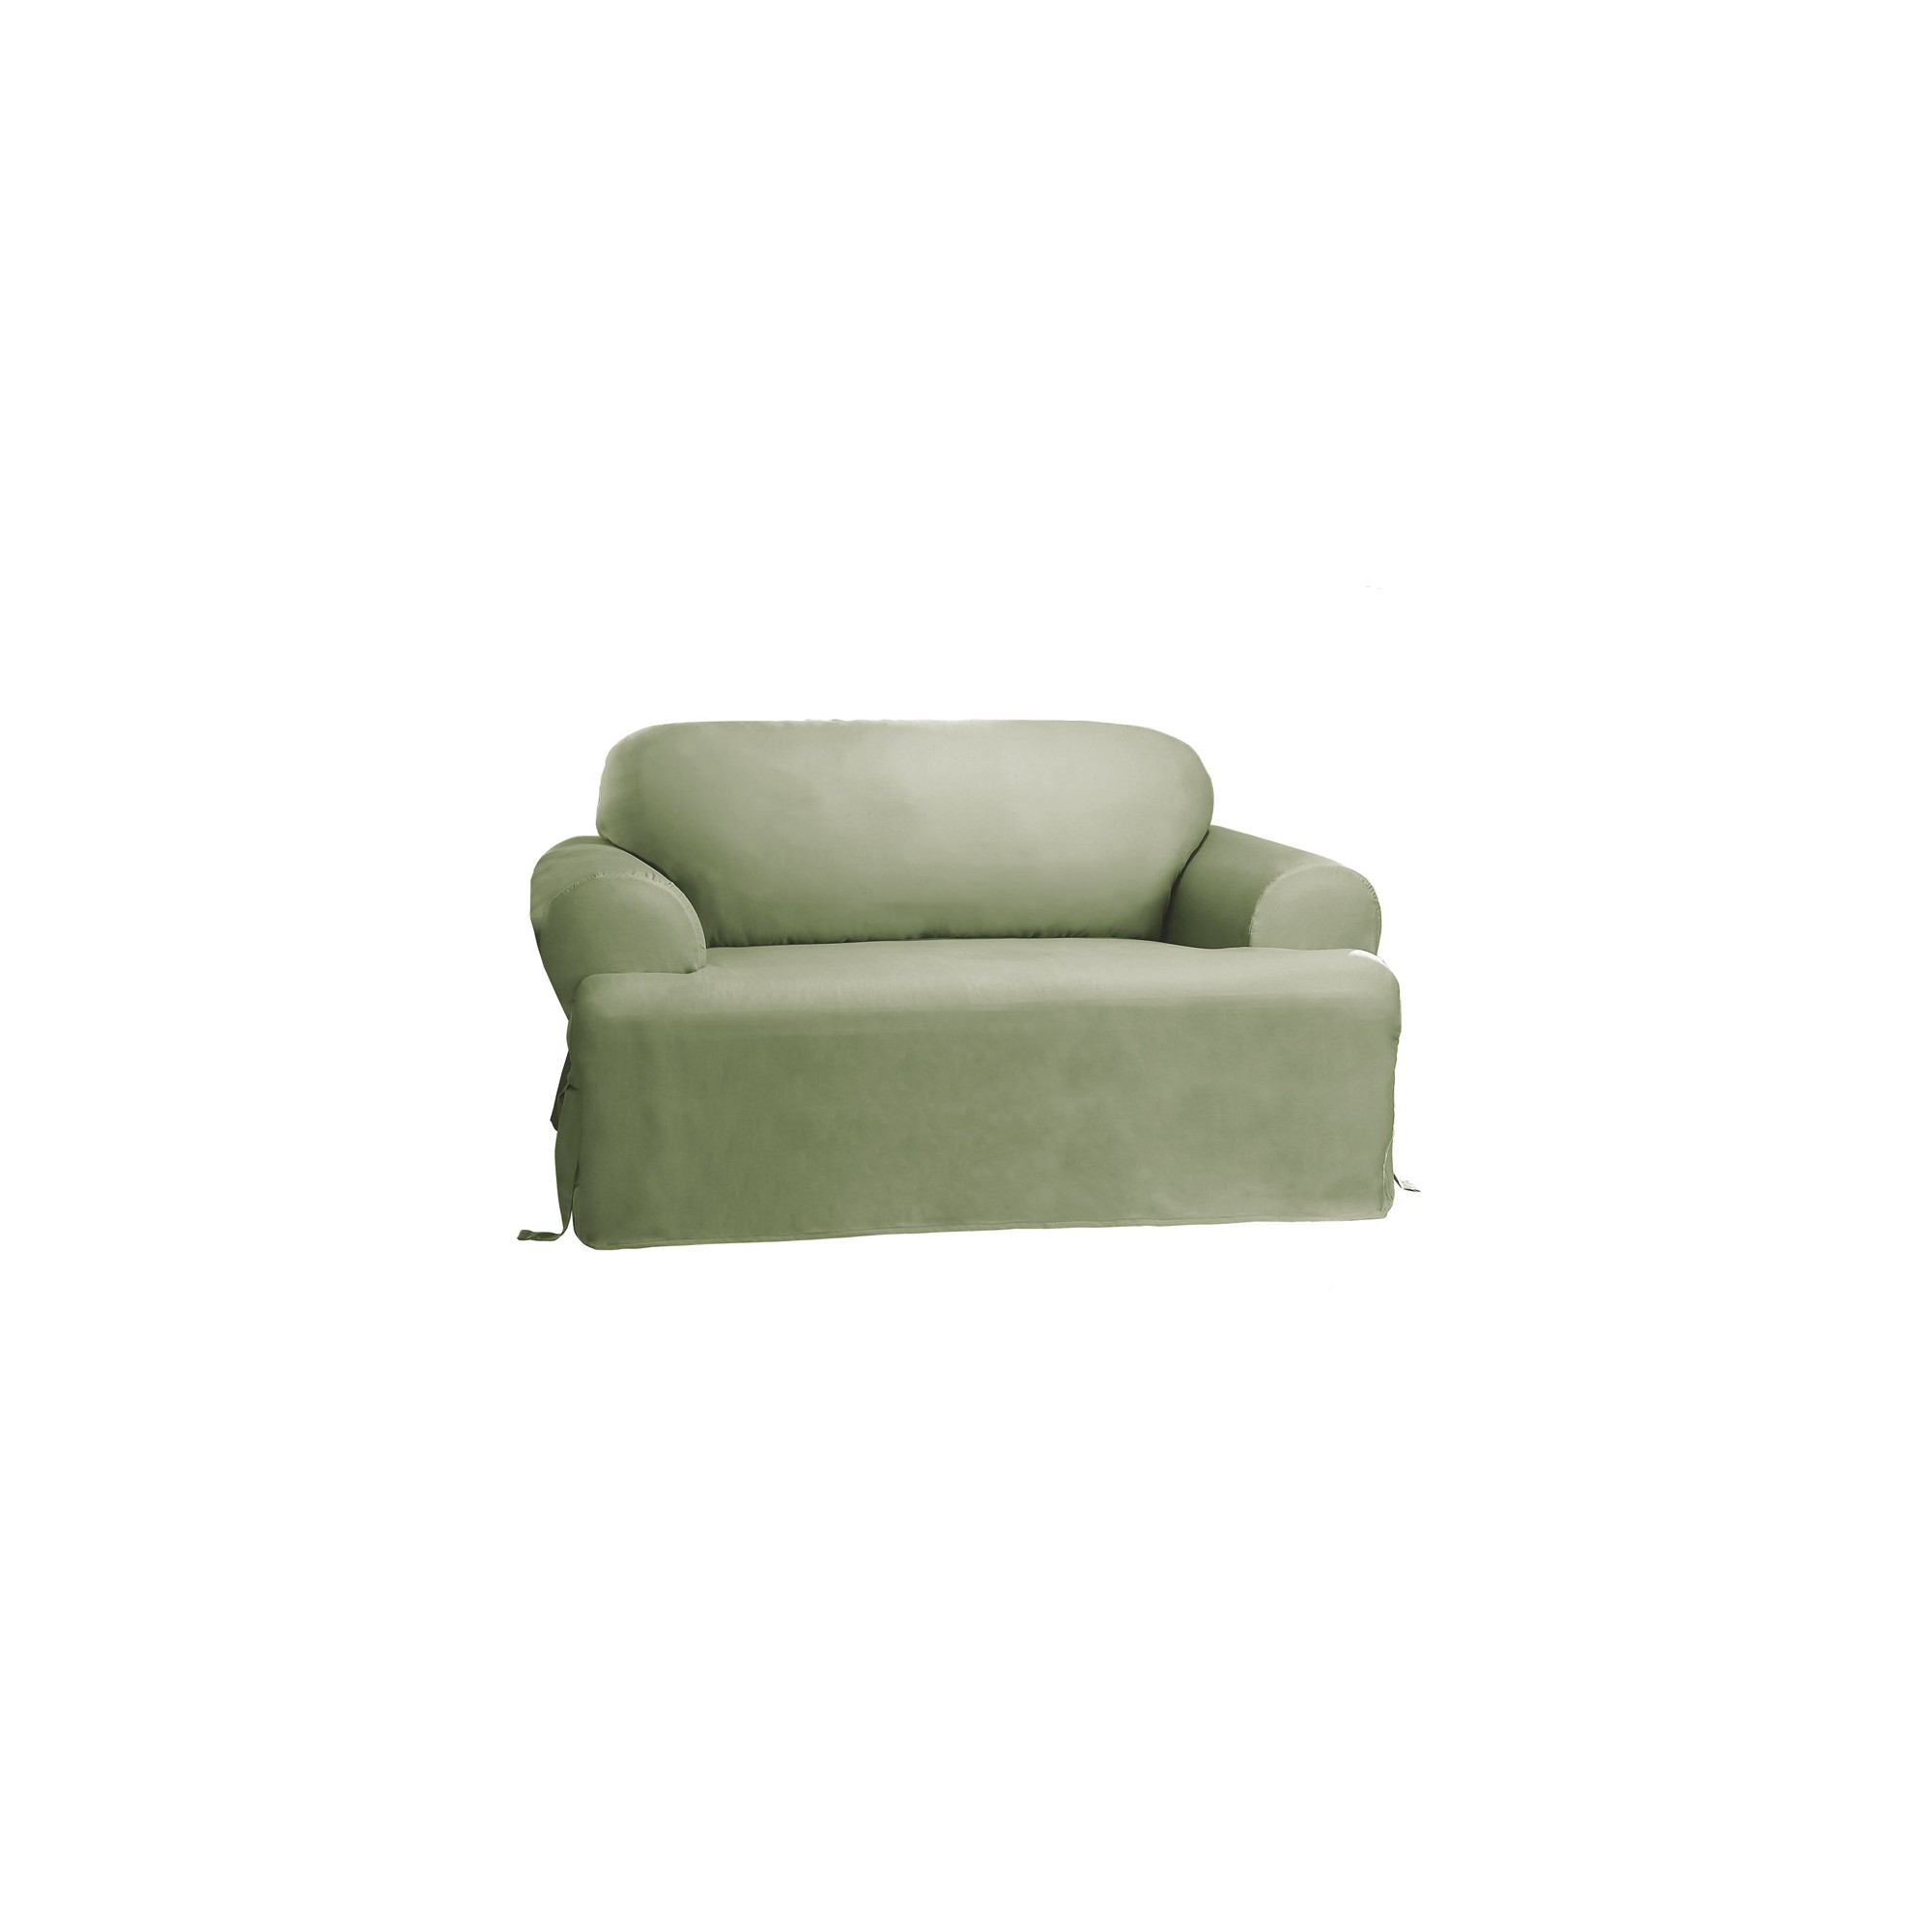 Cotton Duck Tcushion Sofa Slipcover Sage Green - Sure Fit